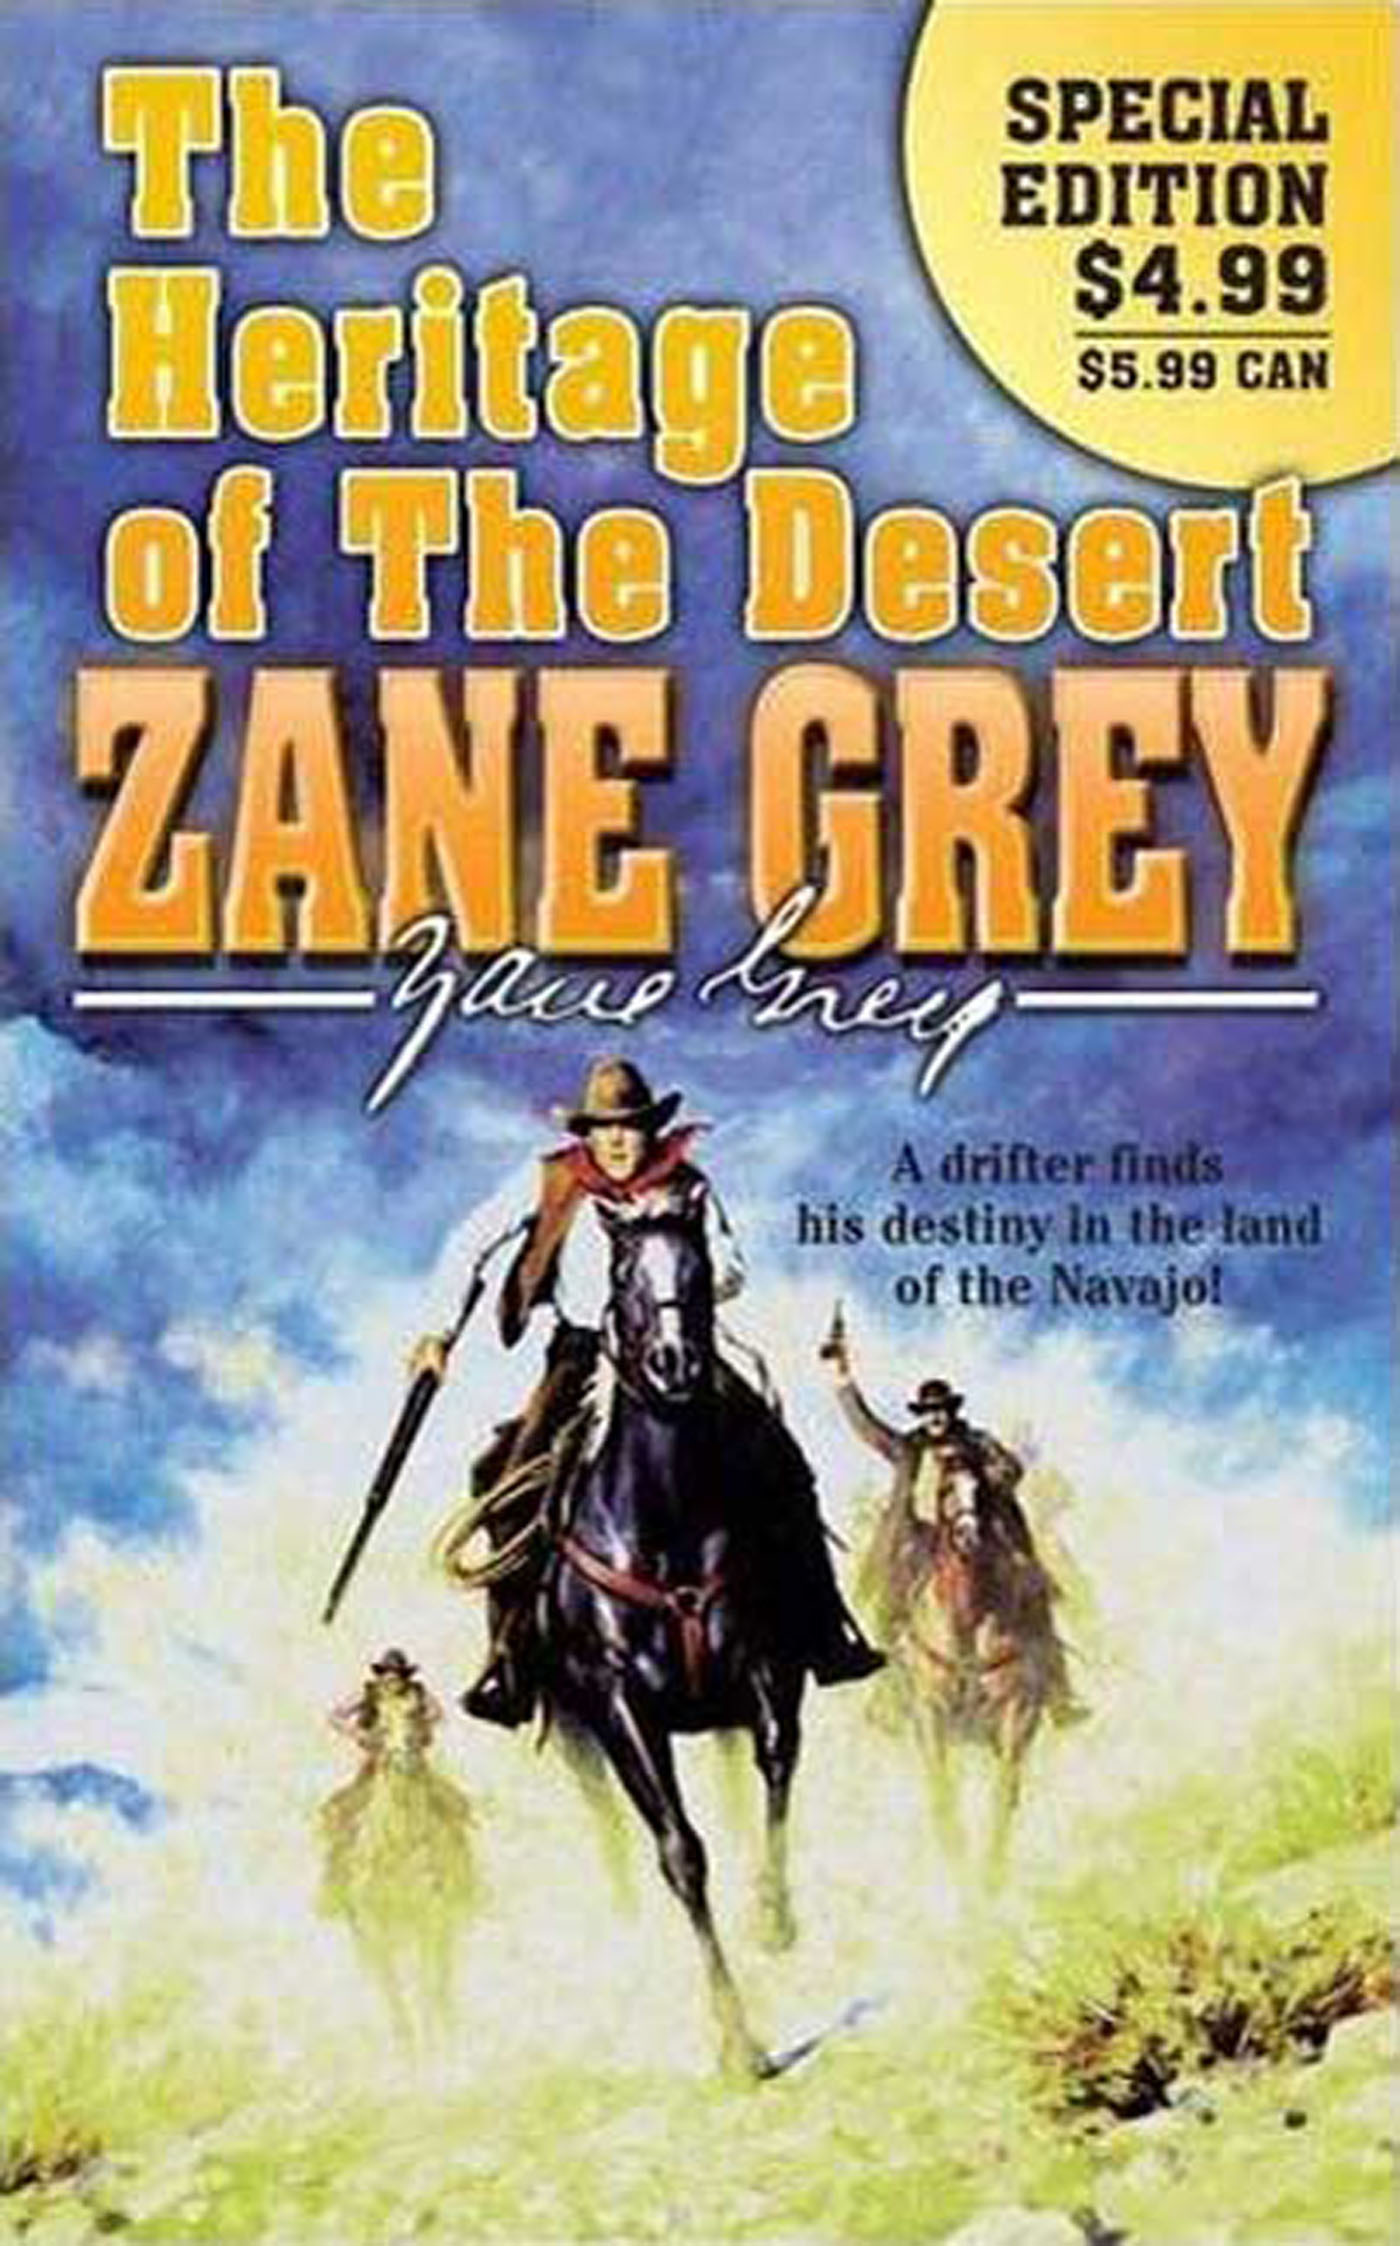 The Heritage of the Desert by Zane Grey